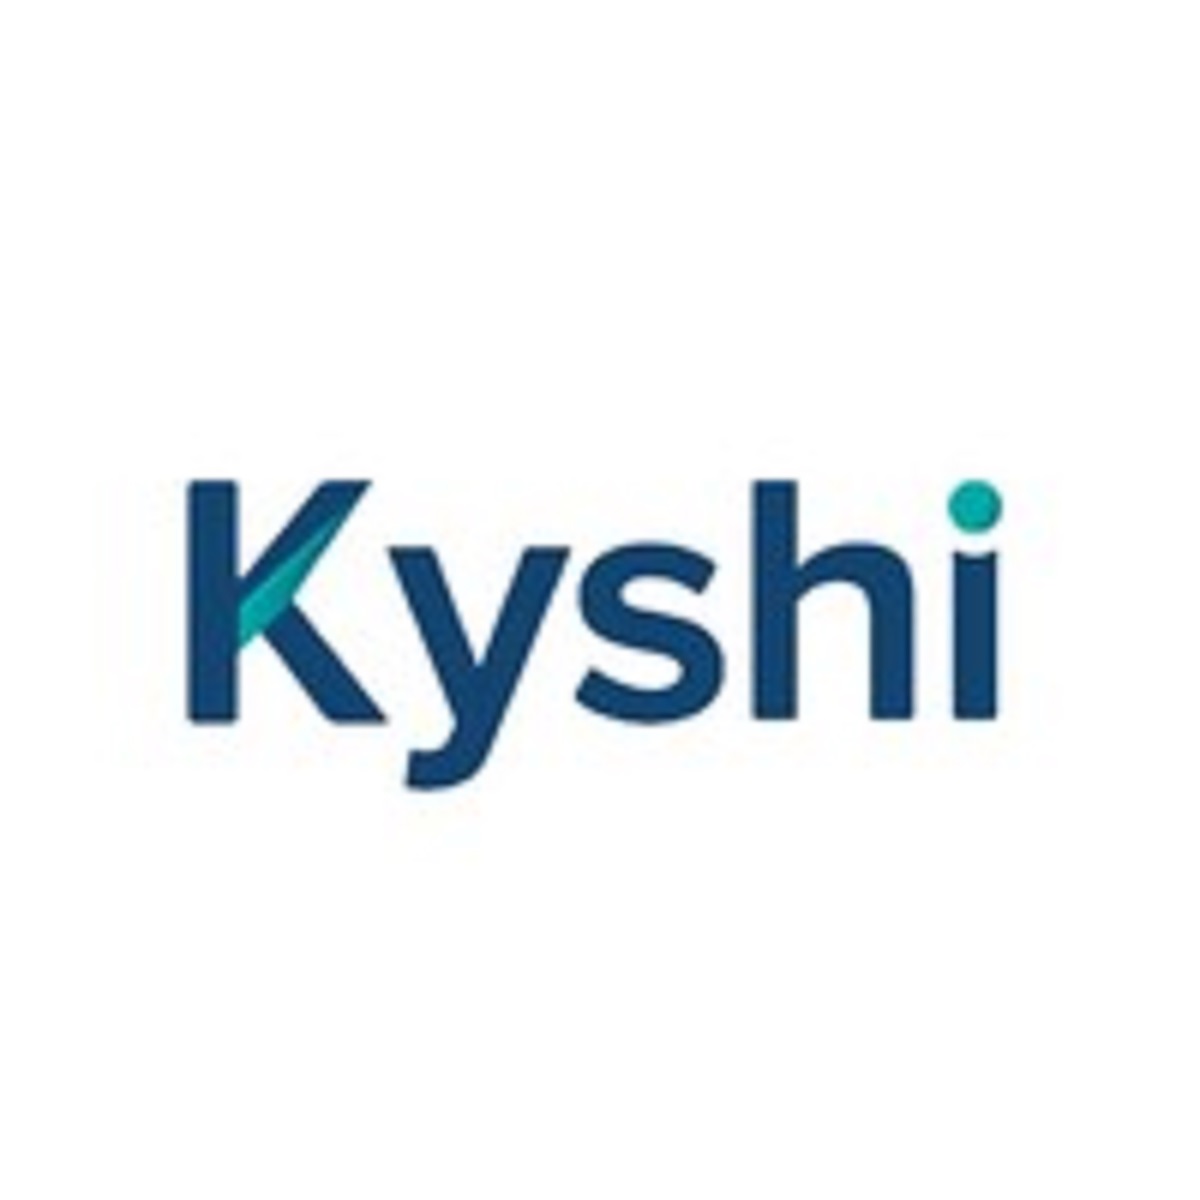 Kyshi: Ending Q1 with expansion